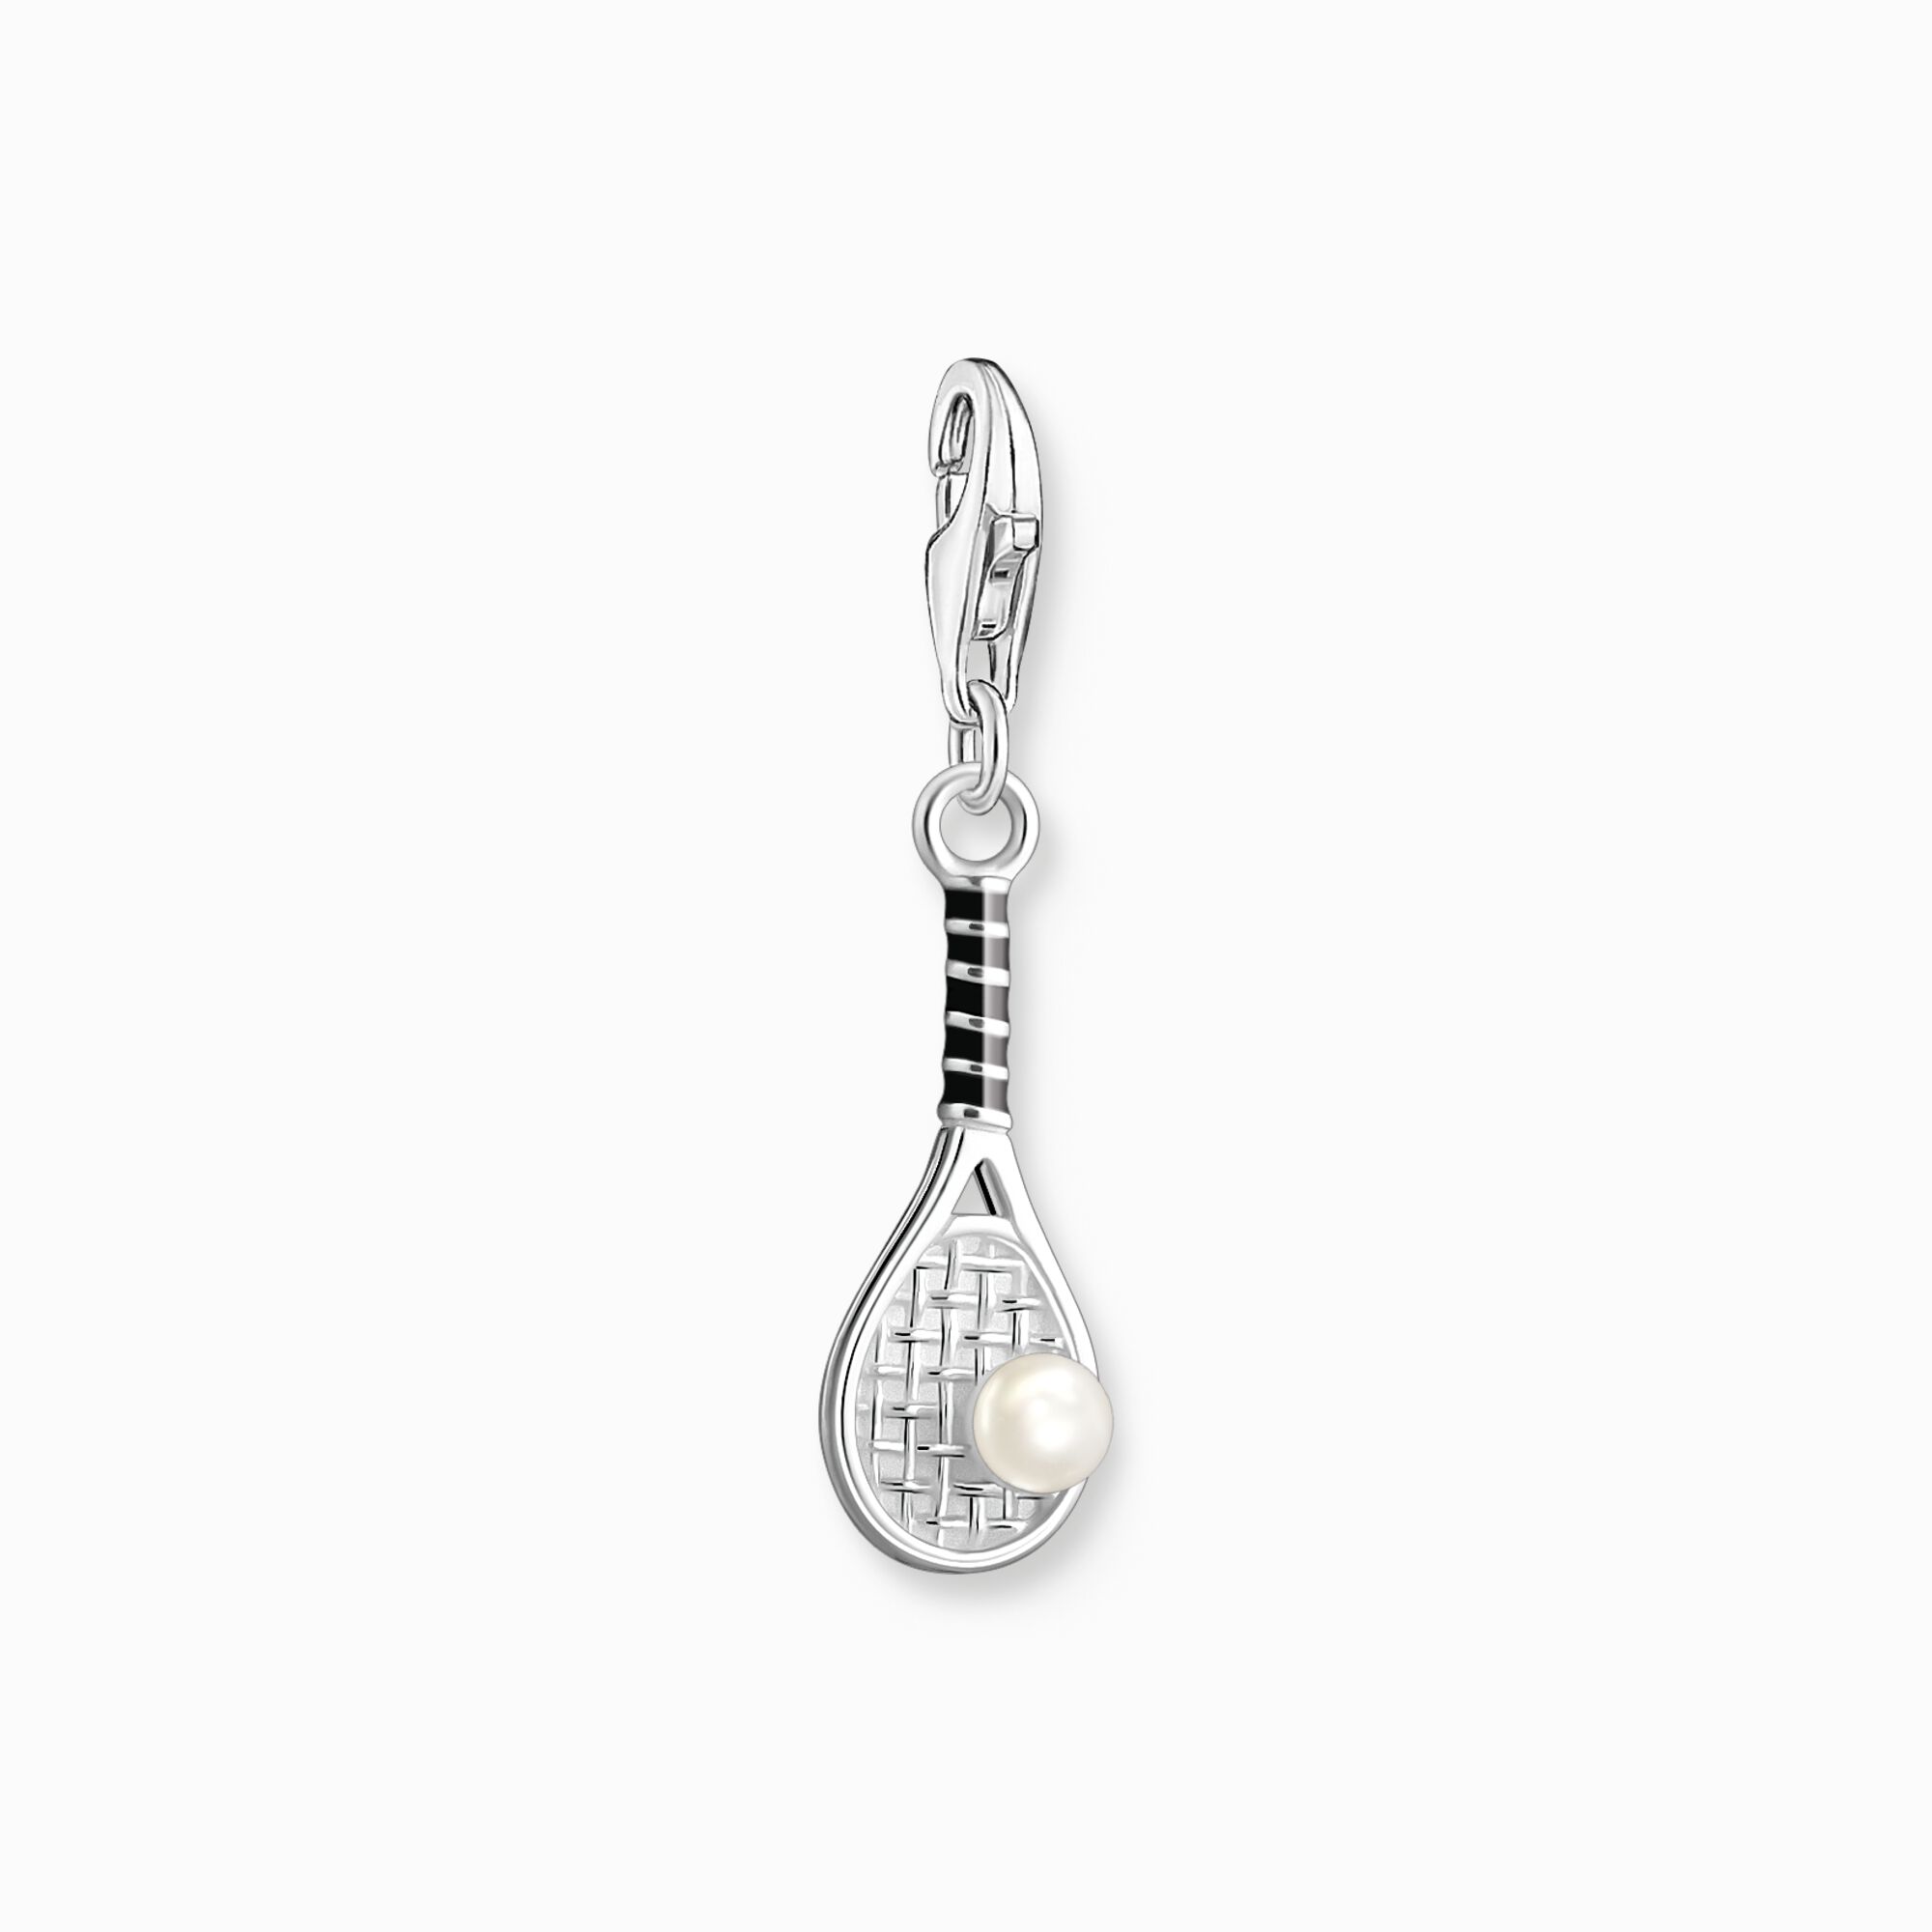 Silver charm pendant tennis racket with freshwater pearl from the Charm Club collection in the THOMAS SABO online store